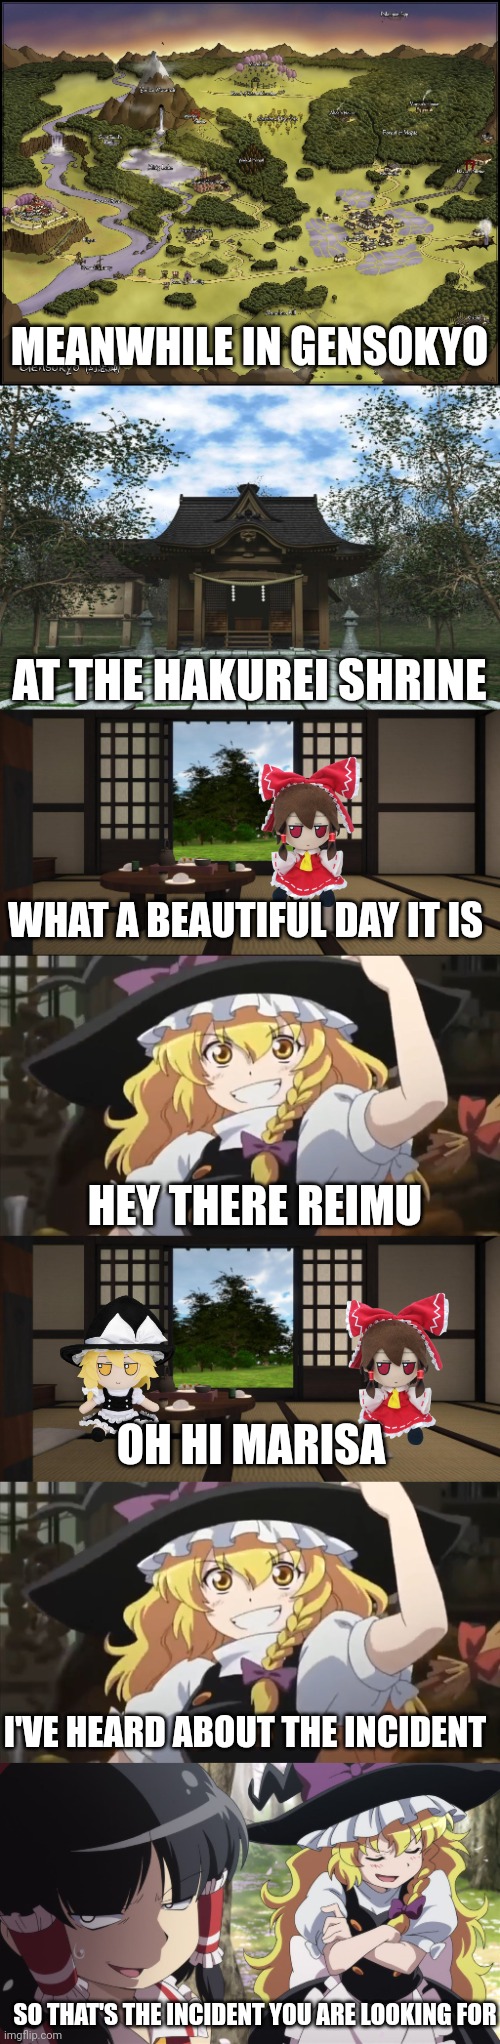 Meanwhile in gensokyo | MEANWHILE IN GENSOKYO; AT THE HAKUREI SHRINE; WHAT A BEAUTIFUL DAY IT IS; HEY THERE REIMU; OH HI MARISA; I'VE HEARD ABOUT THE INCIDENT; SO THAT'S THE INCIDENT YOU ARE LOOKING FOR | made w/ Imgflip meme maker